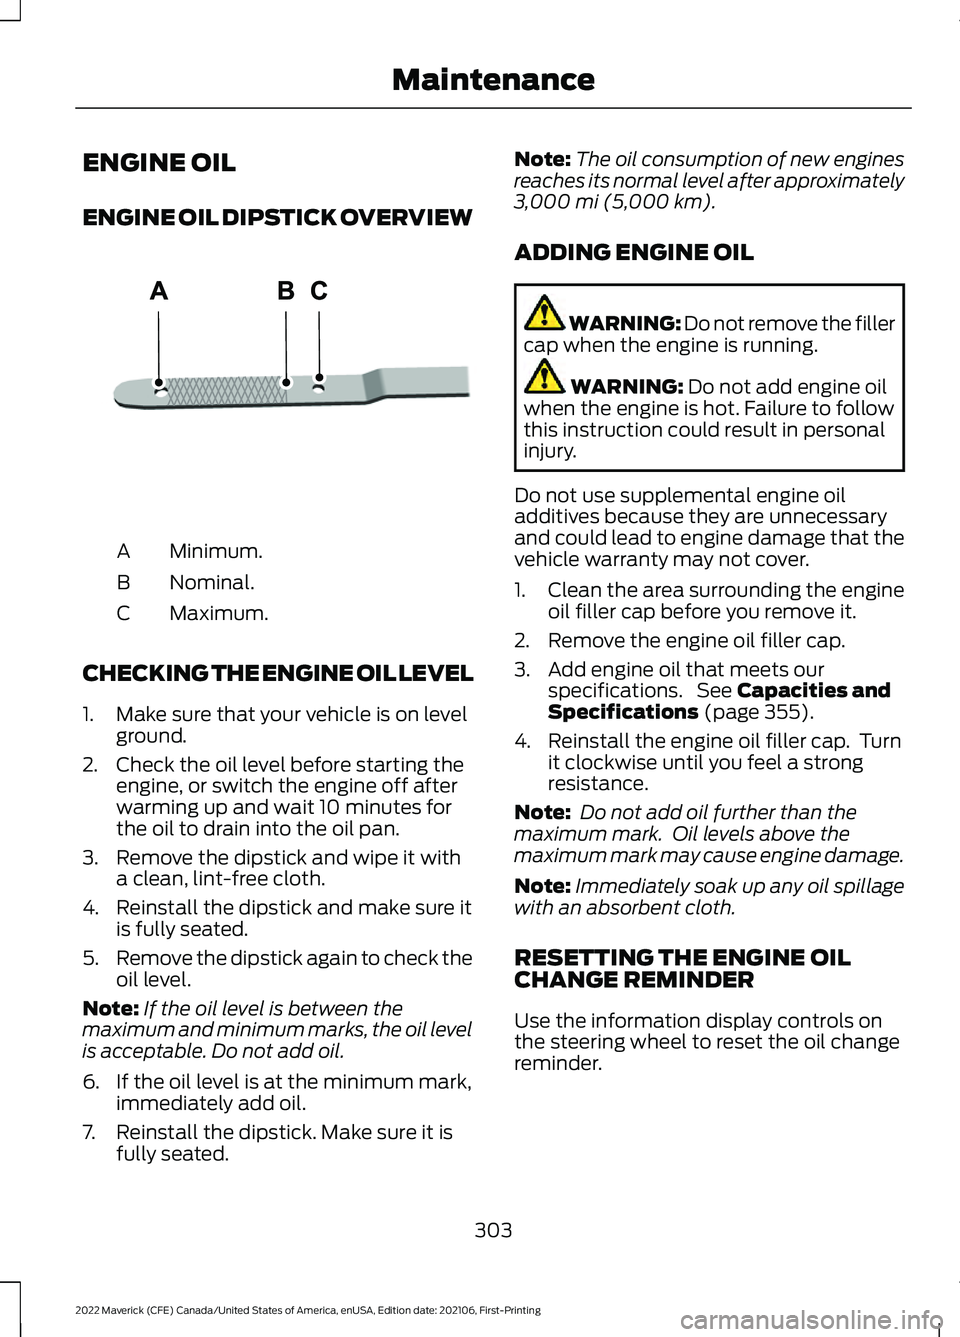 FORD MAVERICK 2022  Owners Manual ENGINE OIL
ENGINE OIL DIPSTICK OVERVIEW
Minimum.
A
Nominal.
B
Maximum.
C
CHECKING THE ENGINE OIL LEVEL
1. Make sure that your vehicle is on level ground.
2. Check the oil level before starting the eng